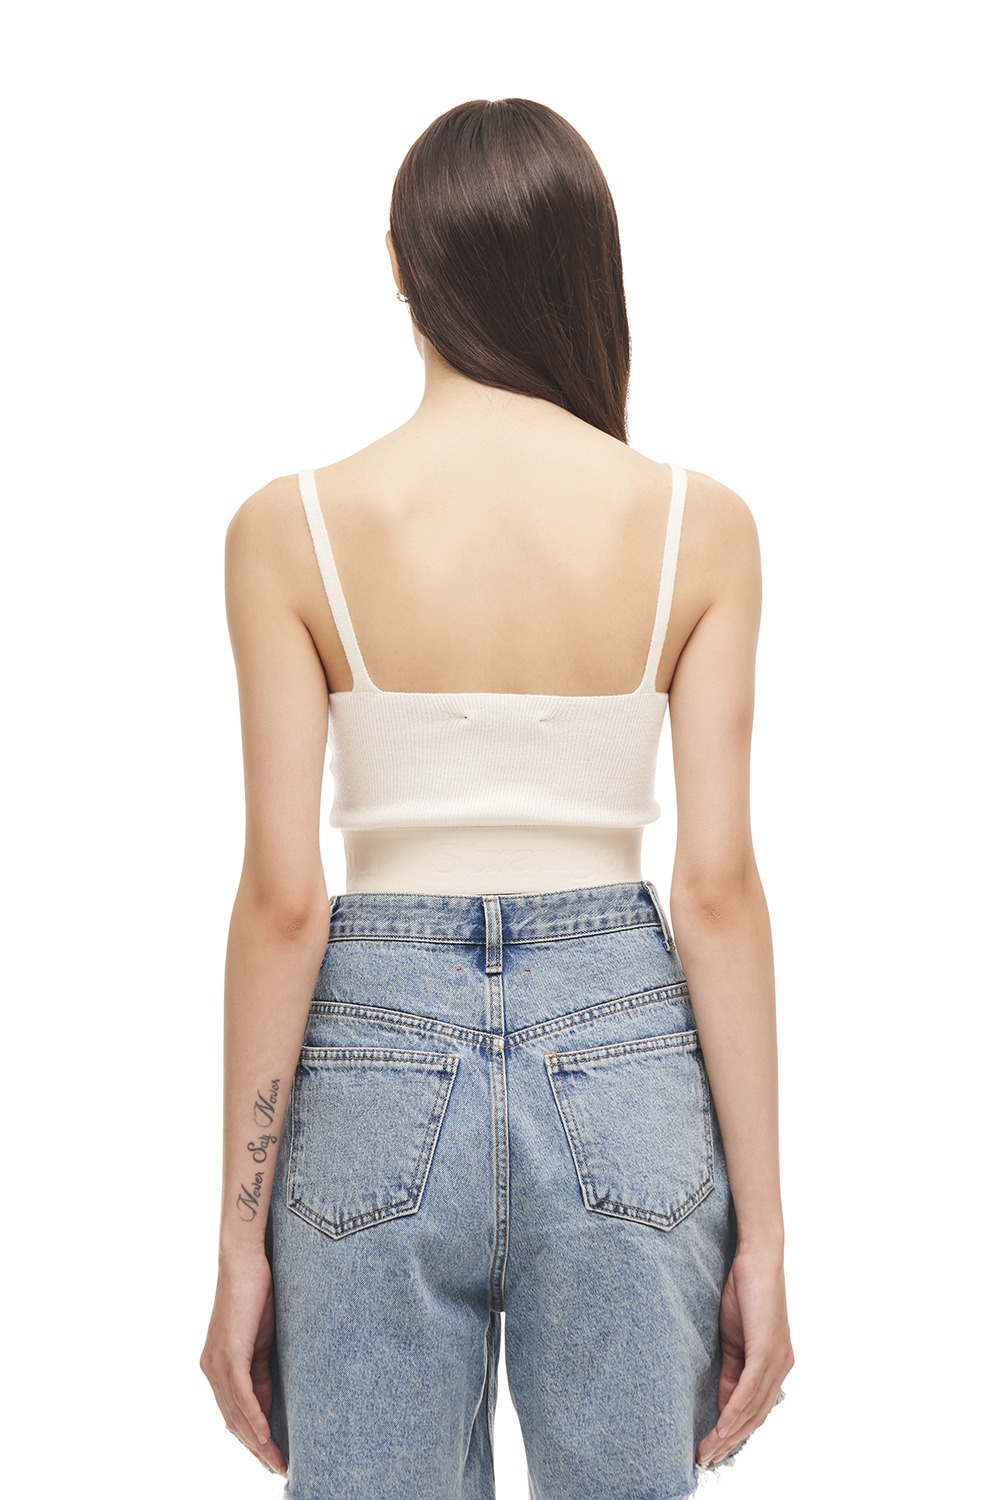 DOWNTOWN GIRL TOP (WHITE)